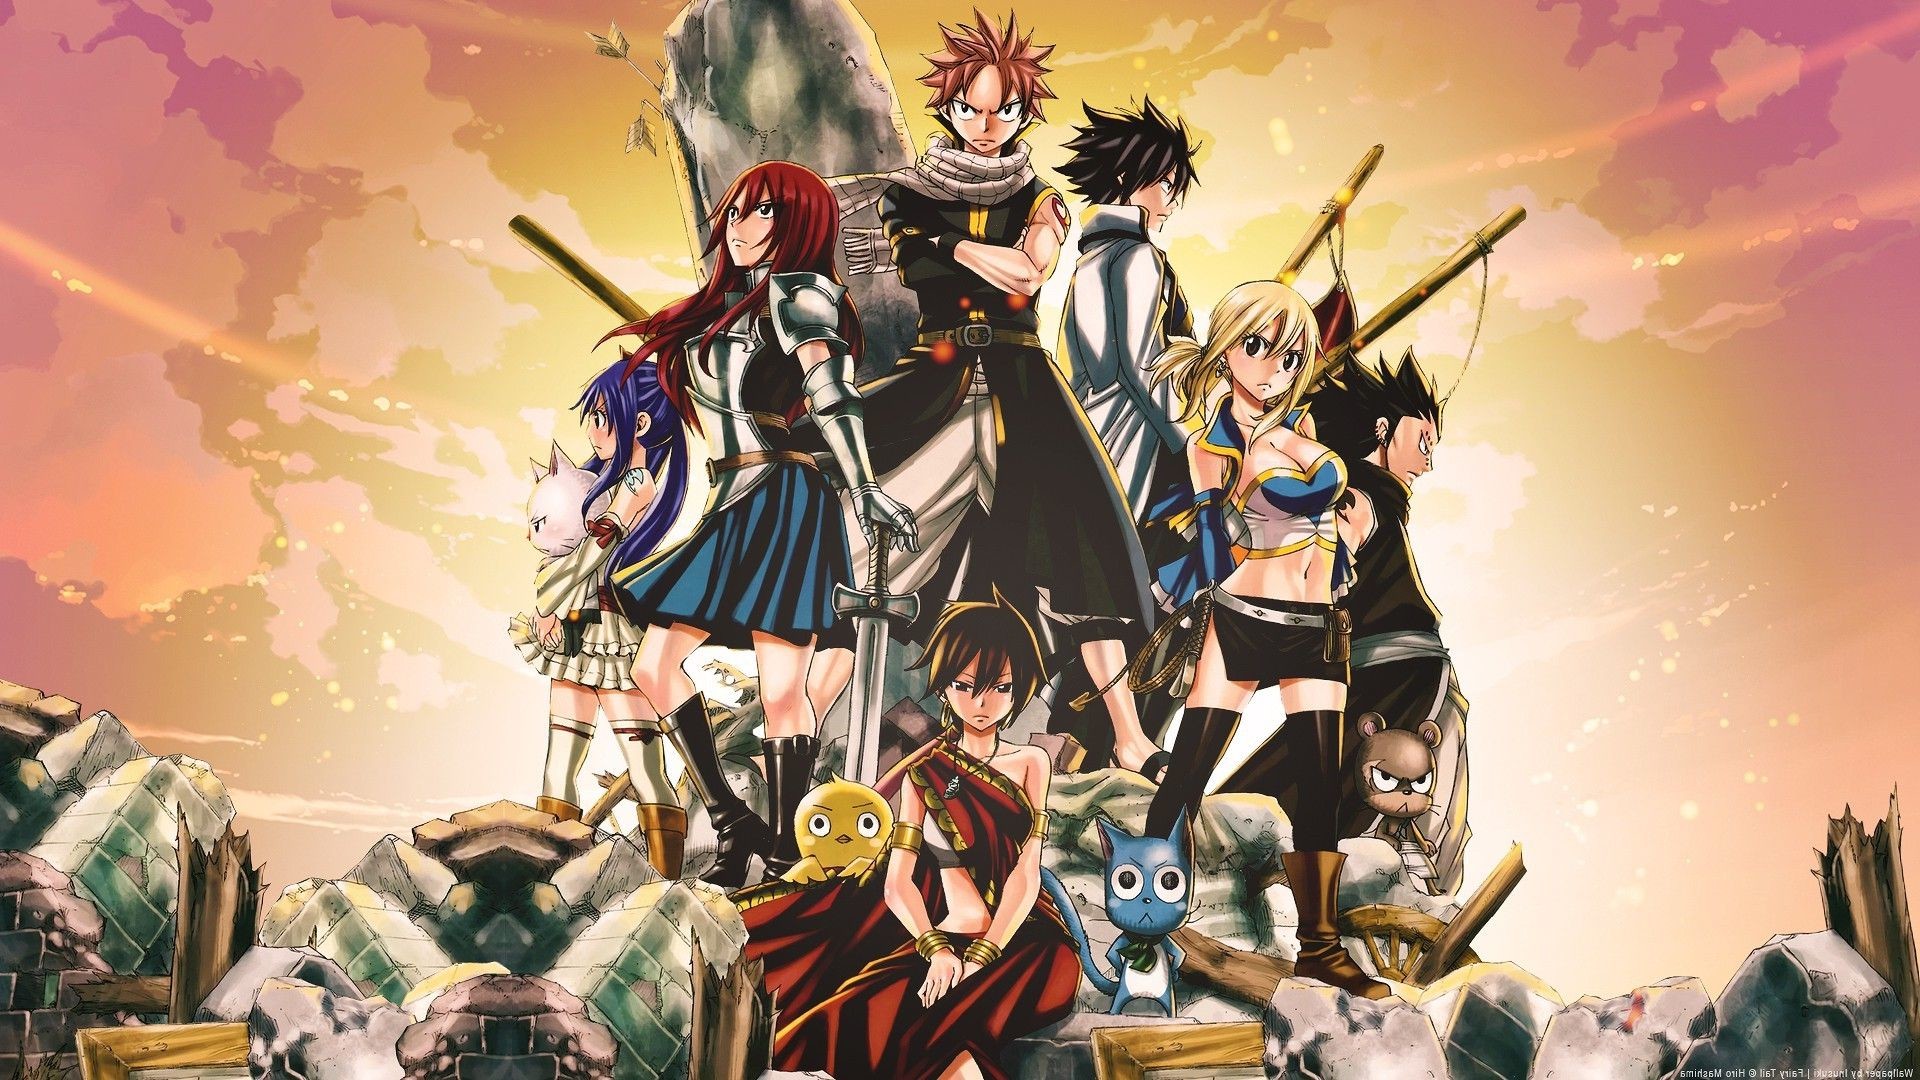 1920x1080 Free Fairy Tail 7 Dragon Slayer Wallpapers Background As Wallpaper .